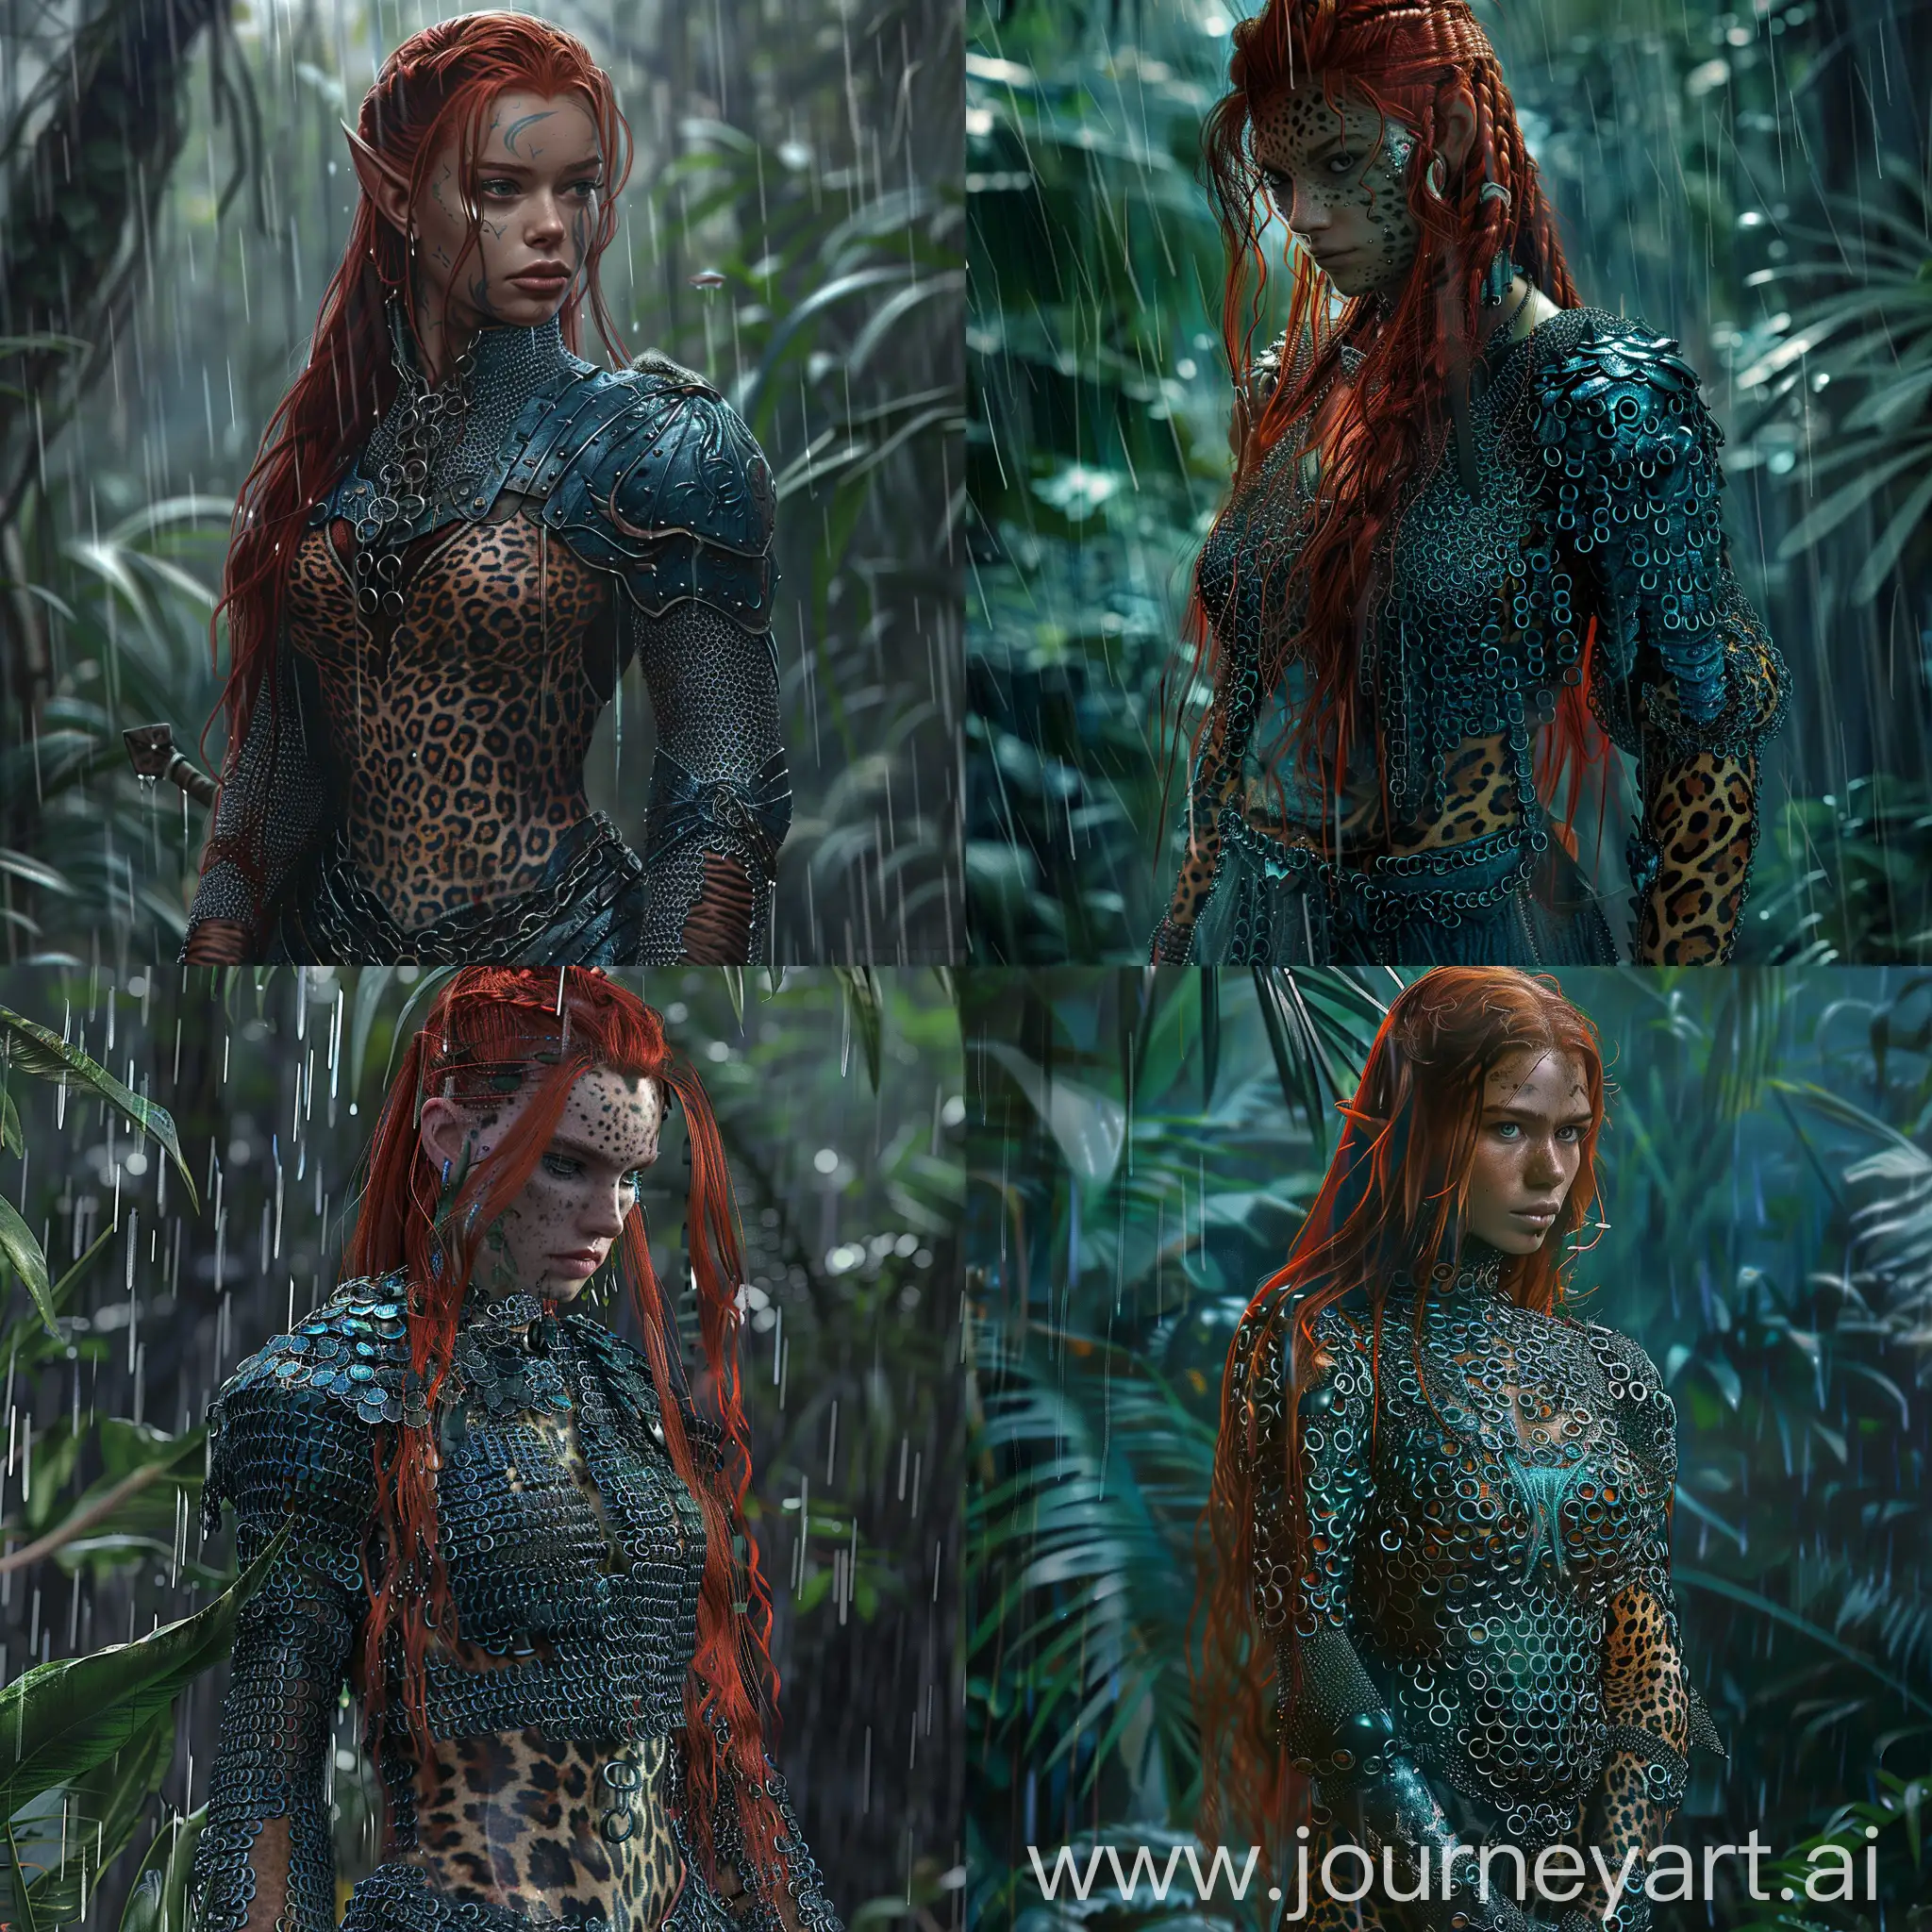 A red-haired, physically trained and sturdy female warrior in leopard armor made of cobalt-colored steel rings that fall down the entire length of her clothes with amazing realism, with a lot of detail, in a jungle in the rain detailed image. Unisex armor, chain mail